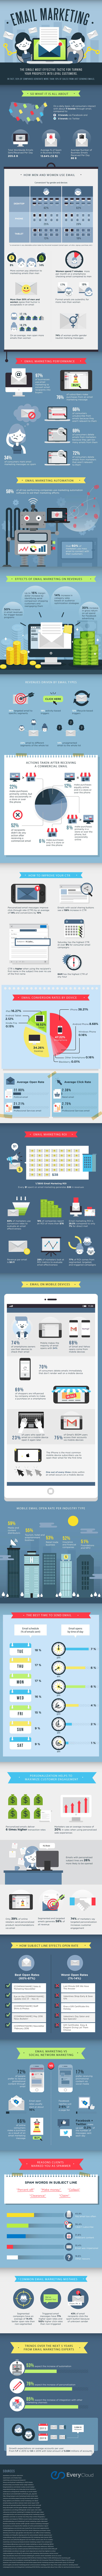 email-marketing-facts-stats1